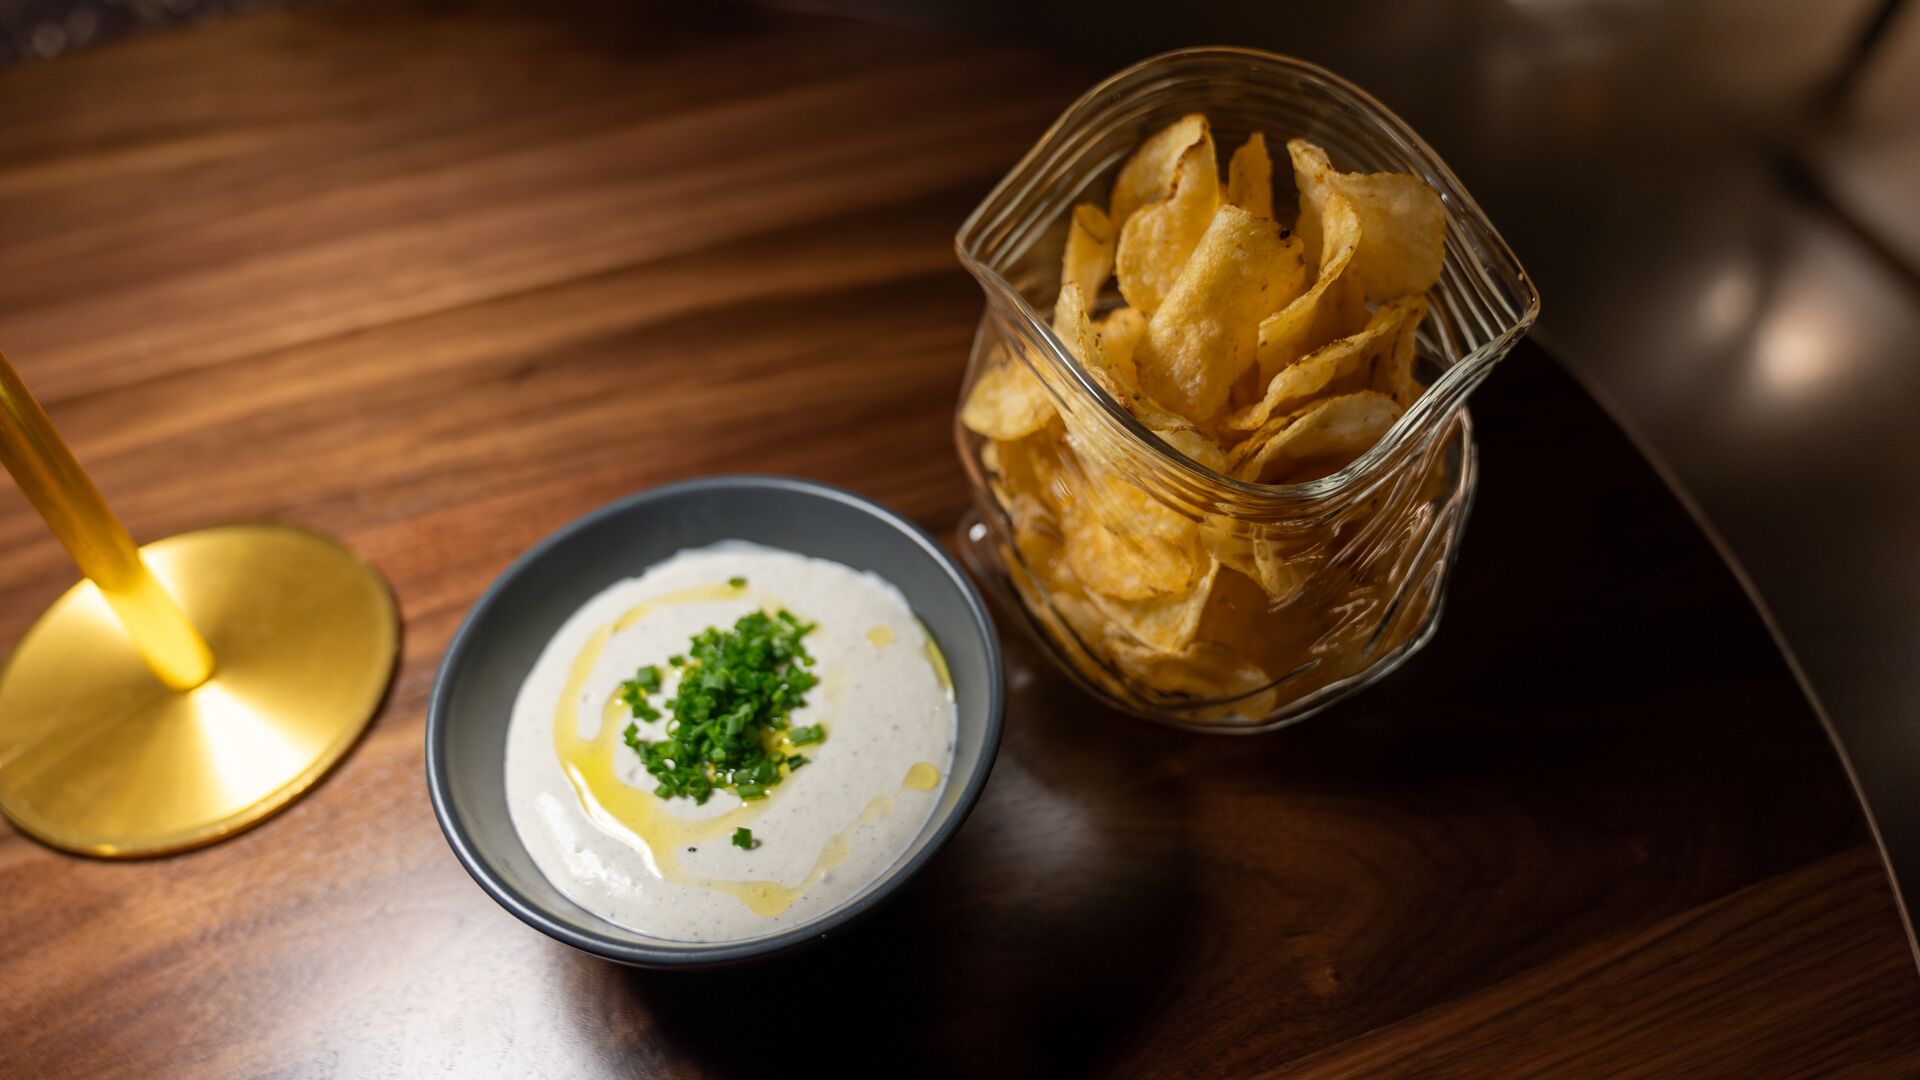 The charred scallion dip comes with kettle chips.